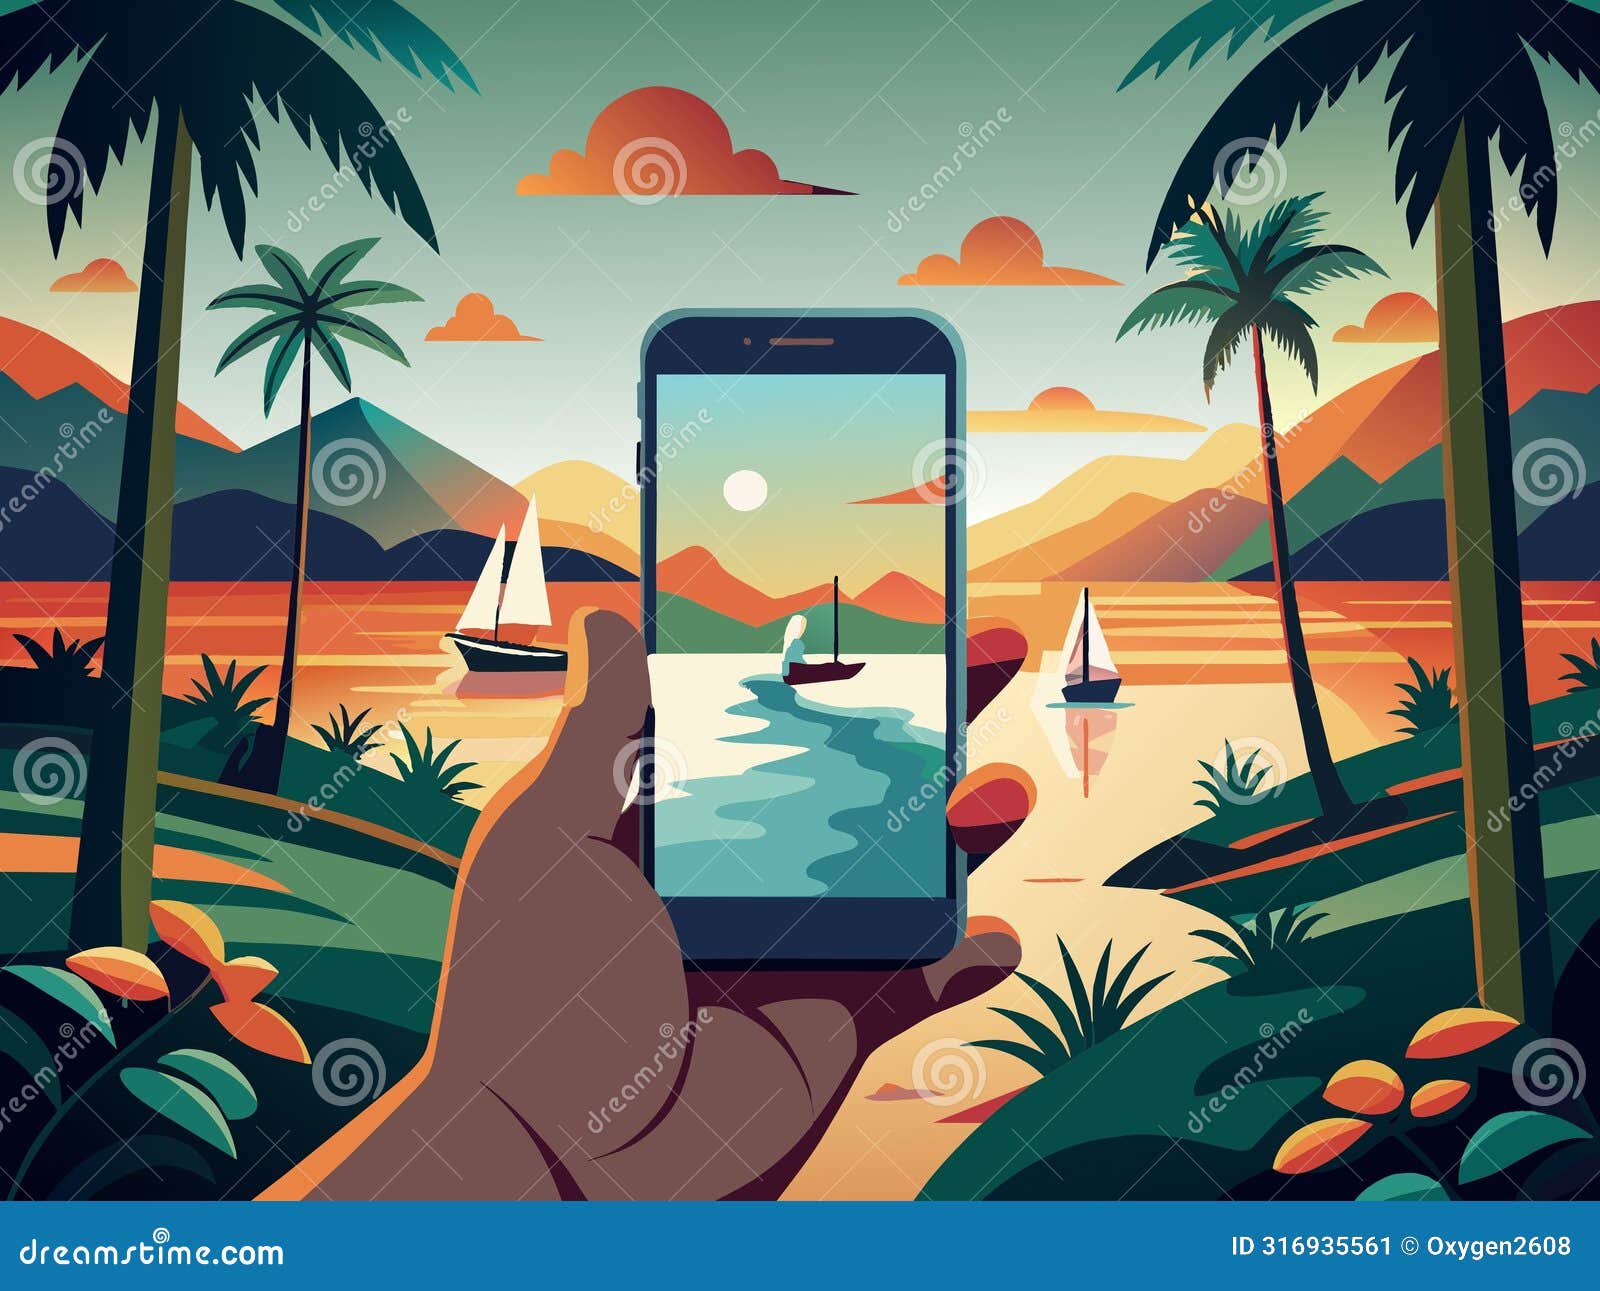 capturing tropical sunset on smartphone: palm trees, mountains and sailing boats 